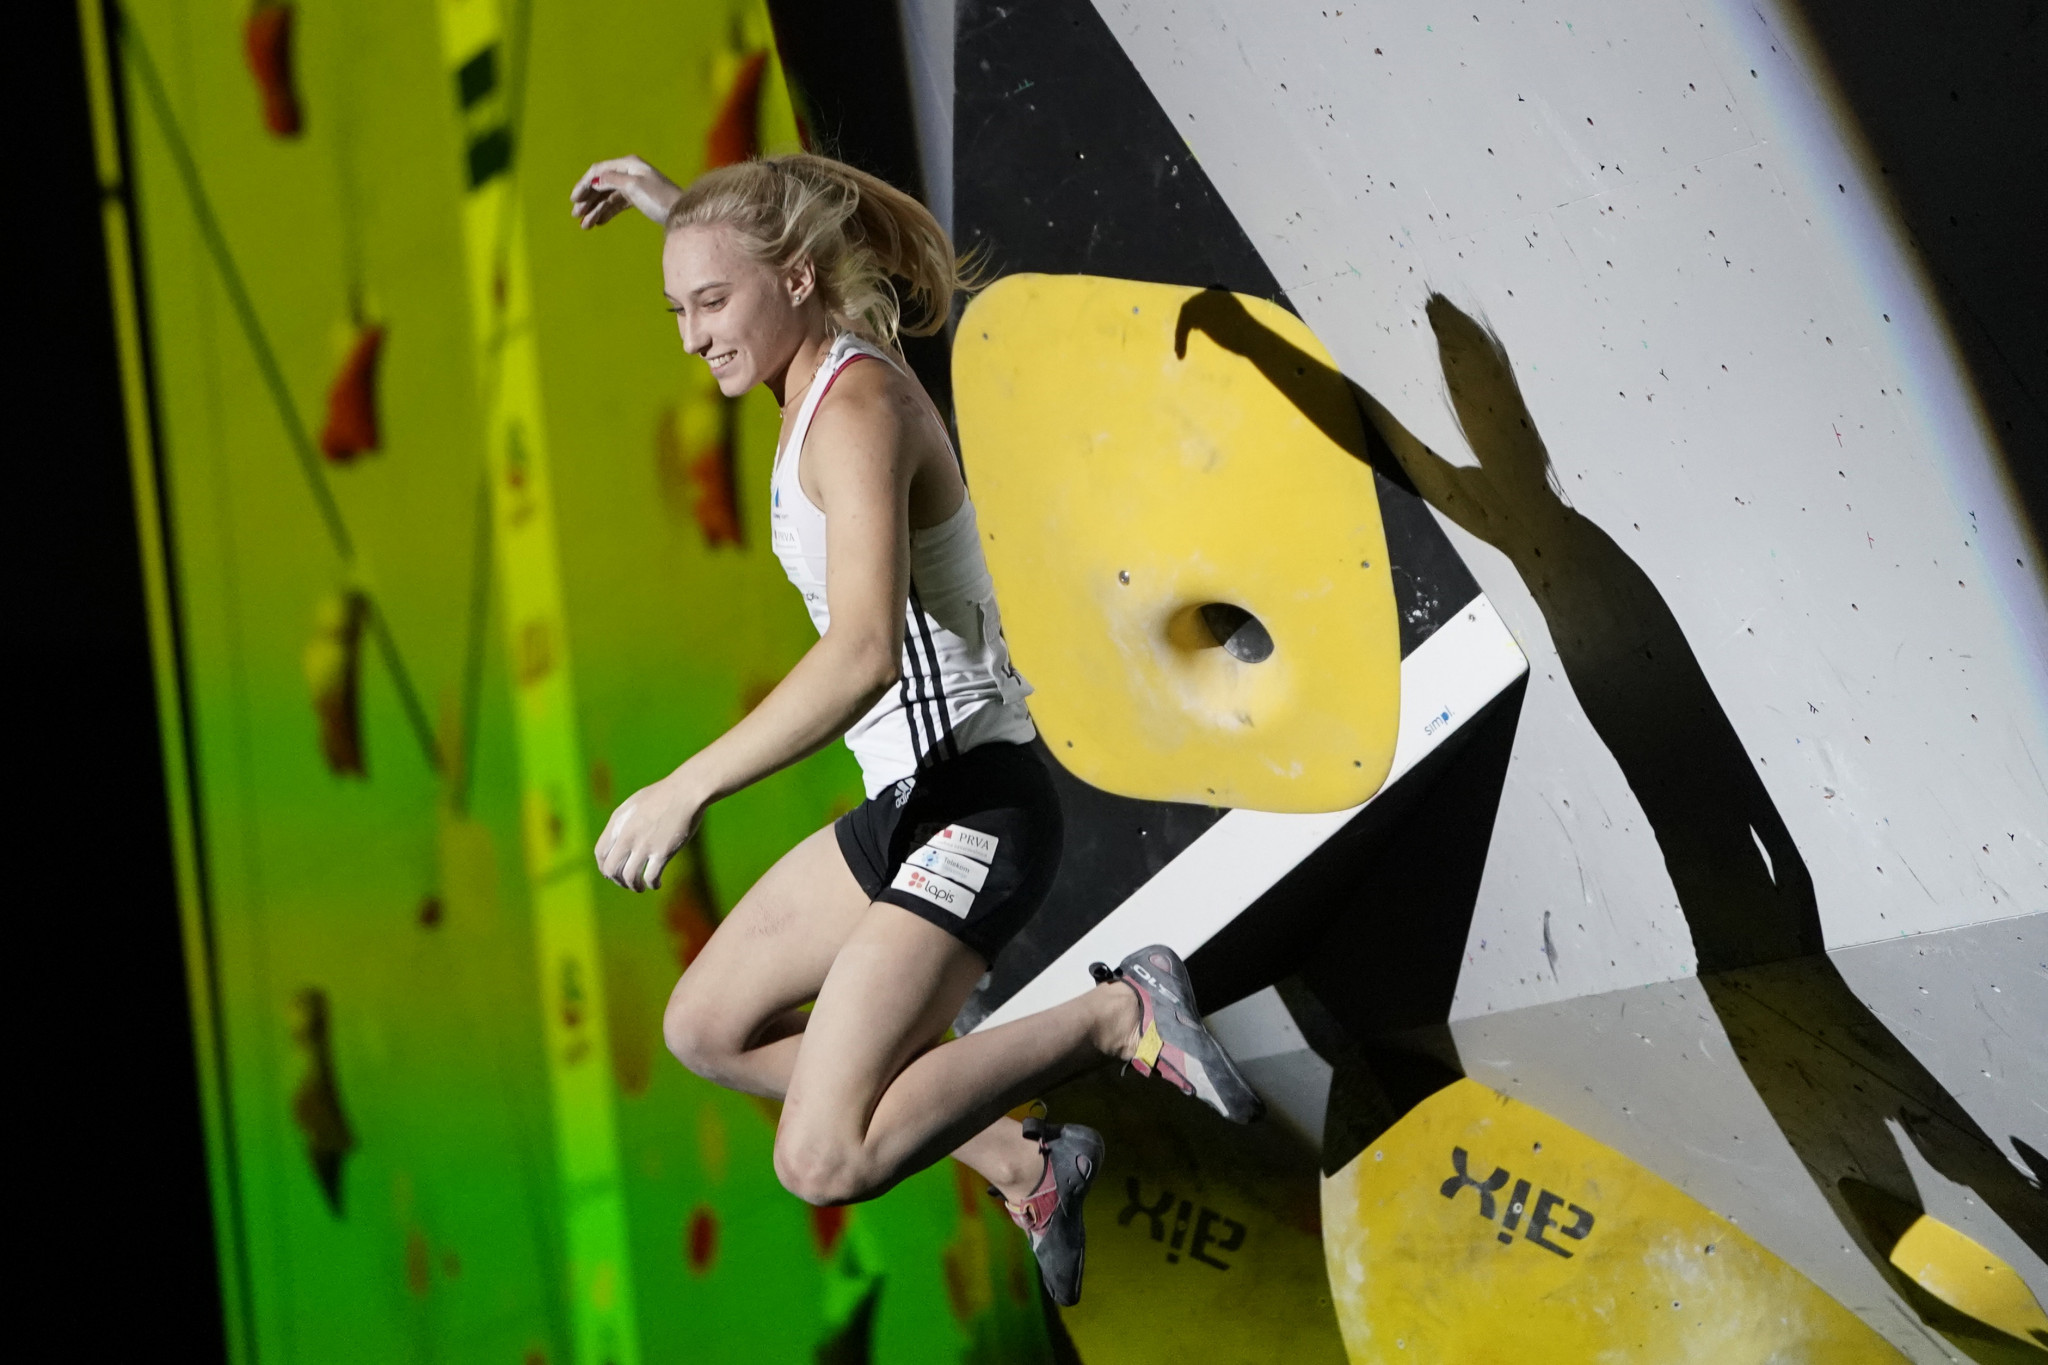 Garnbret and Ondra aiming to build on lead World Championships victories as IFSC Climbing World Cup returns